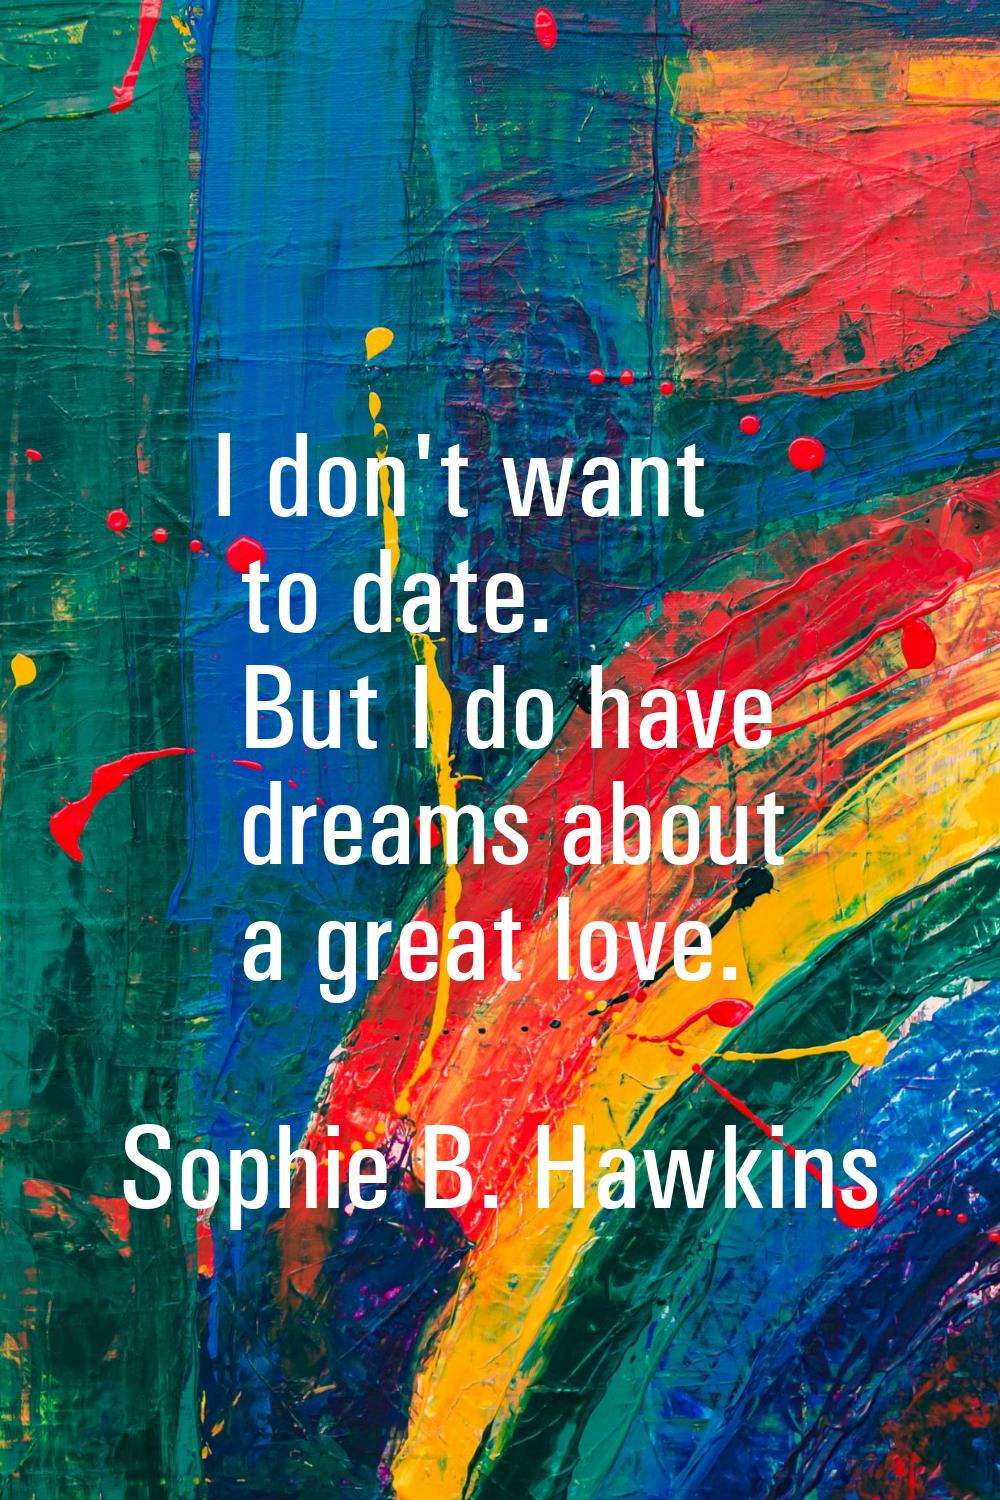 I don't want to date. But I do have dreams about a great love.